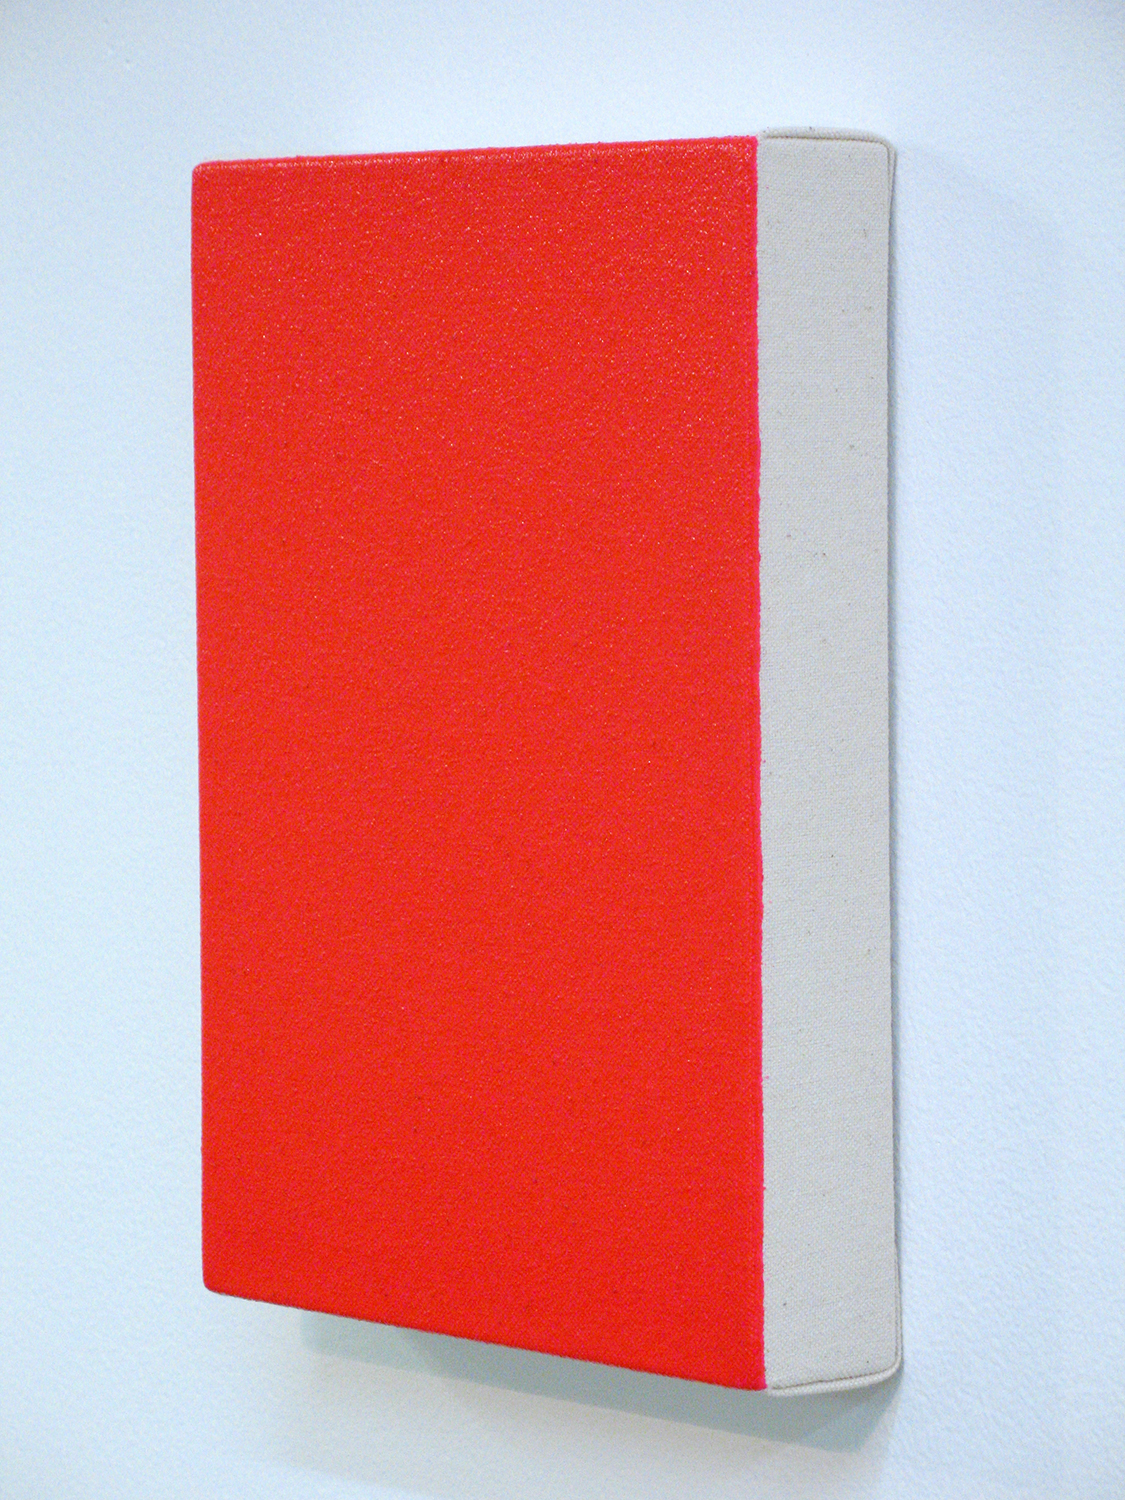 Text No.599 　acrylic, ink on cotton 232 x 160 x 40 mm 2006